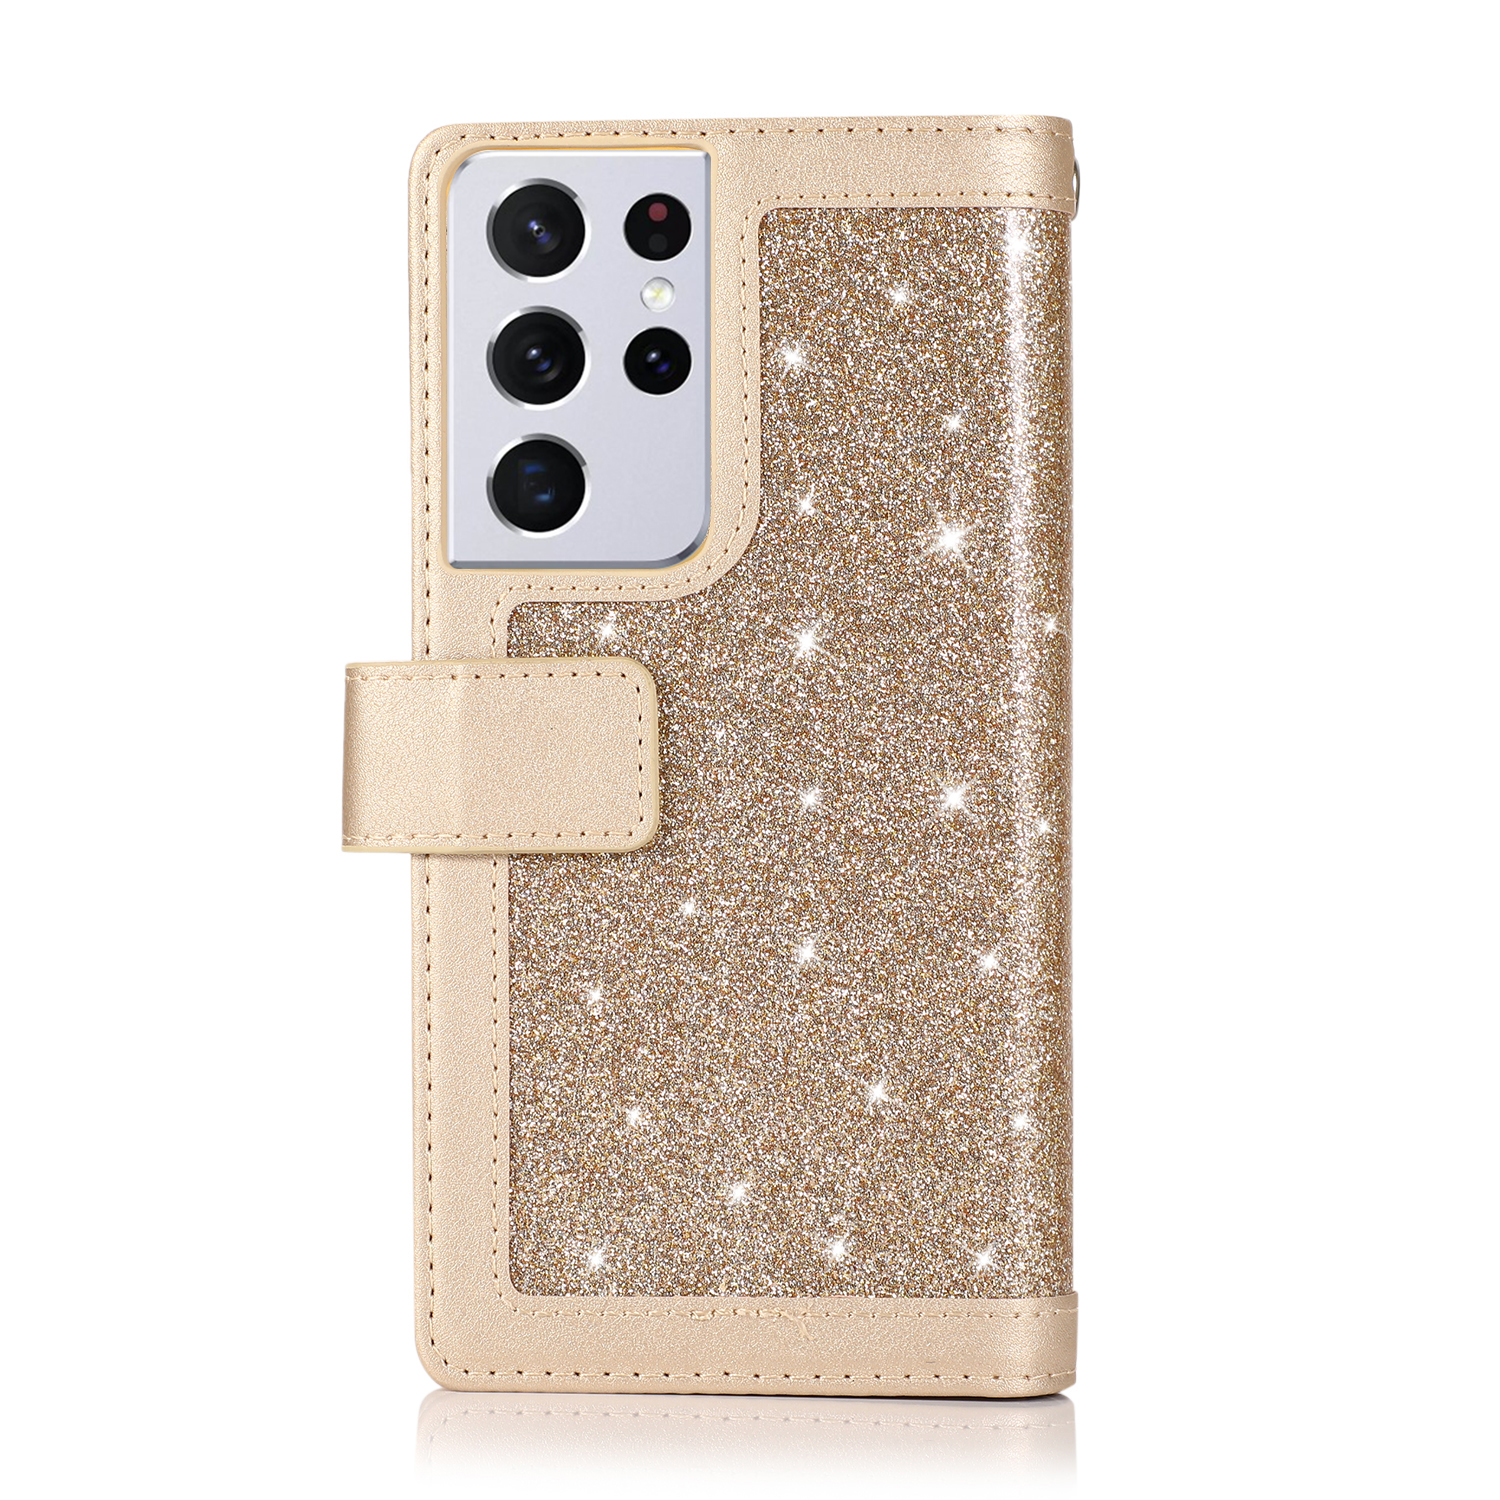 Galaxy S21 Ultra Wallet Case,Allytech Bling Flip Folio PU Leather Magnetic Kickstand Cell Phone Cover with Credit Card Holder,Zipper Pocket Wrist Strap for Samsung Galaxy S21 Ultra 5G 6.8 Inch, Gold - image 3 of 7